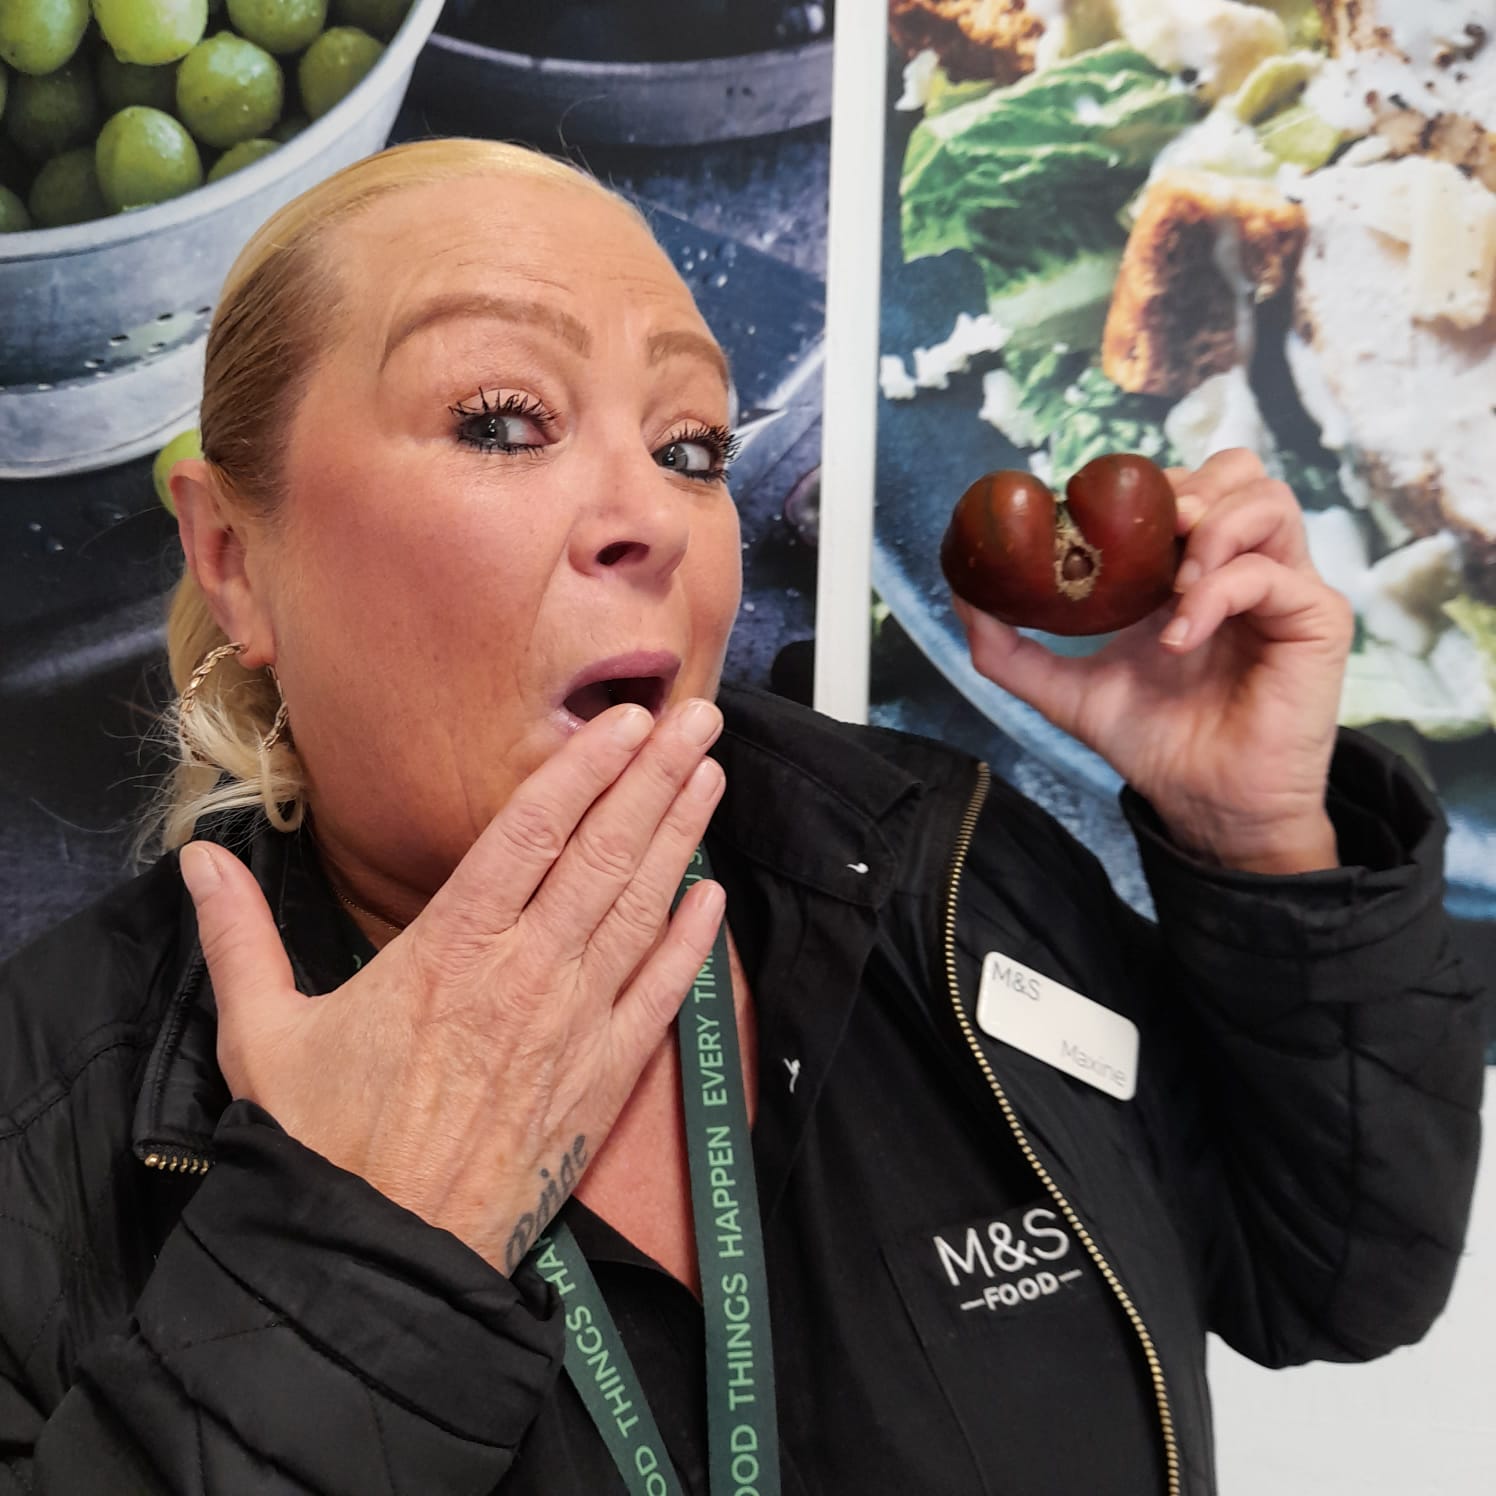 Saucy tomato deemed too inappropriate to sell in M&S